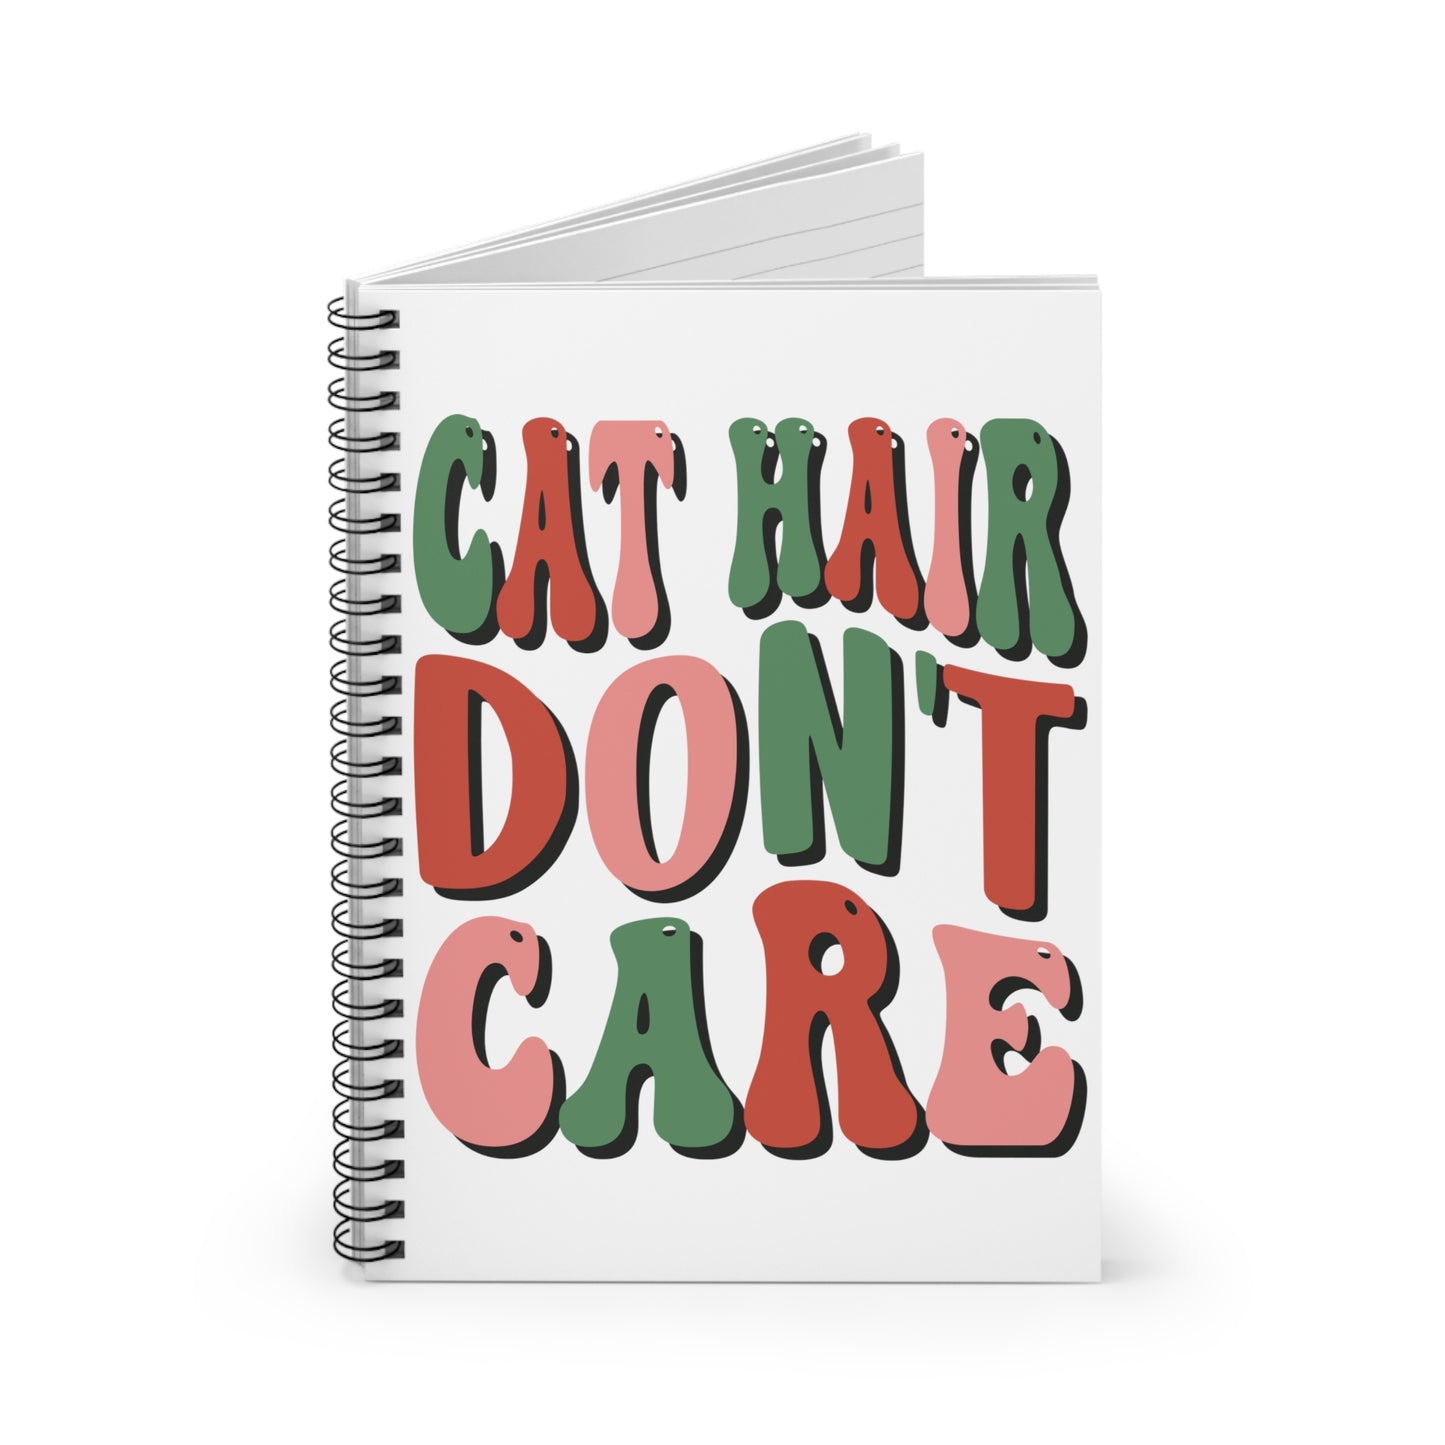 Cat Hair Don't Care: Spiral Notebook - Log Books - Journals - Diaries - and More Custom Printed by TheGlassyLass